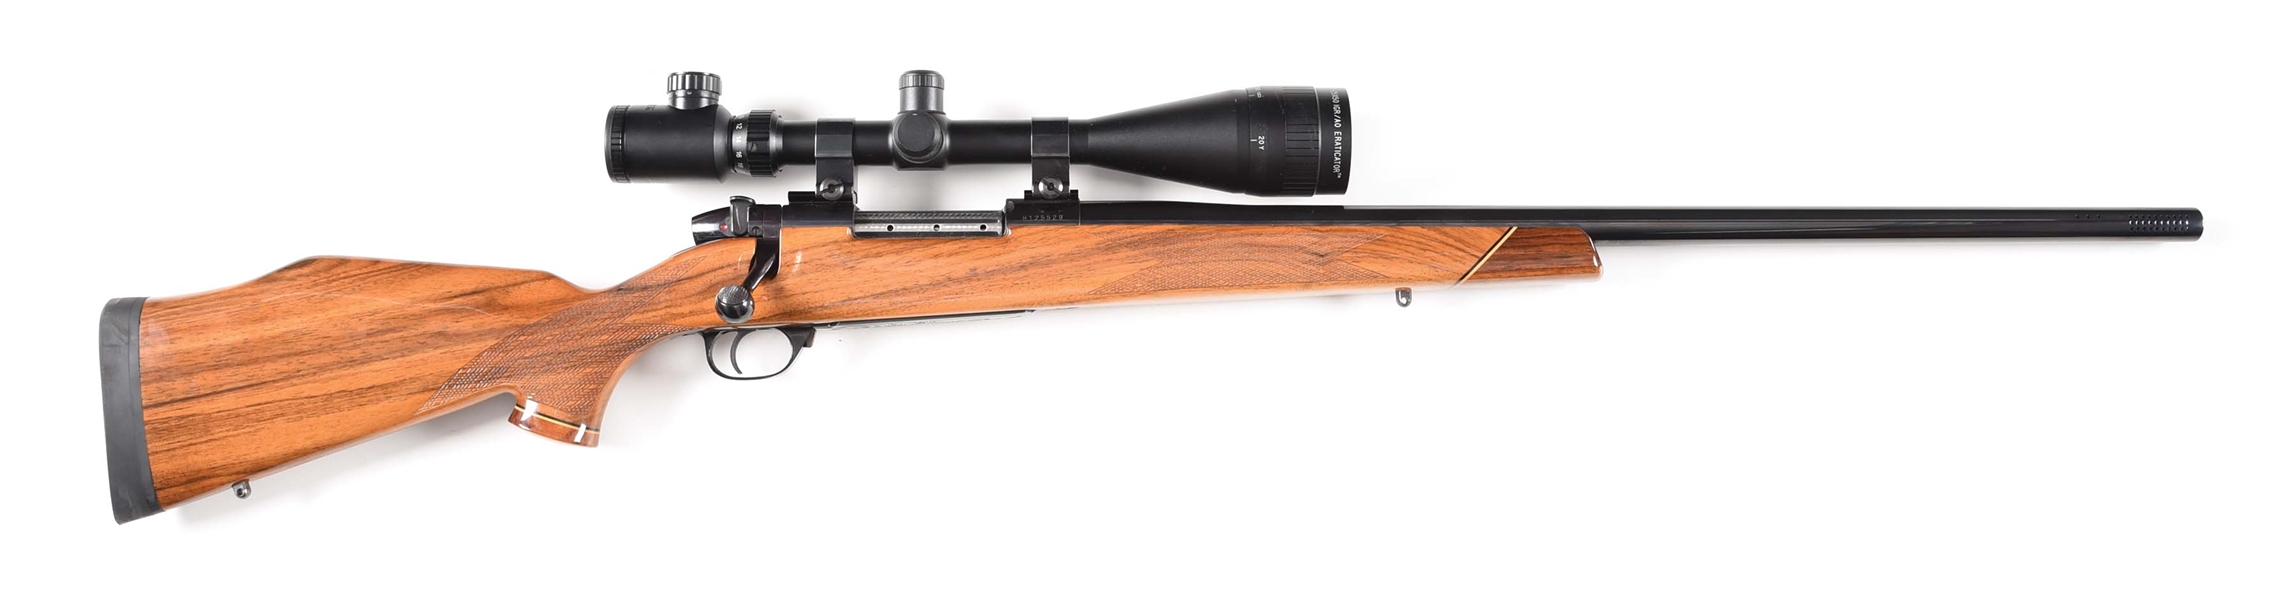 (M) WEATHERBY MARK V CUSTOM .460 MAGNUM BOLT ACTION RIFLE WITH SCOPE.